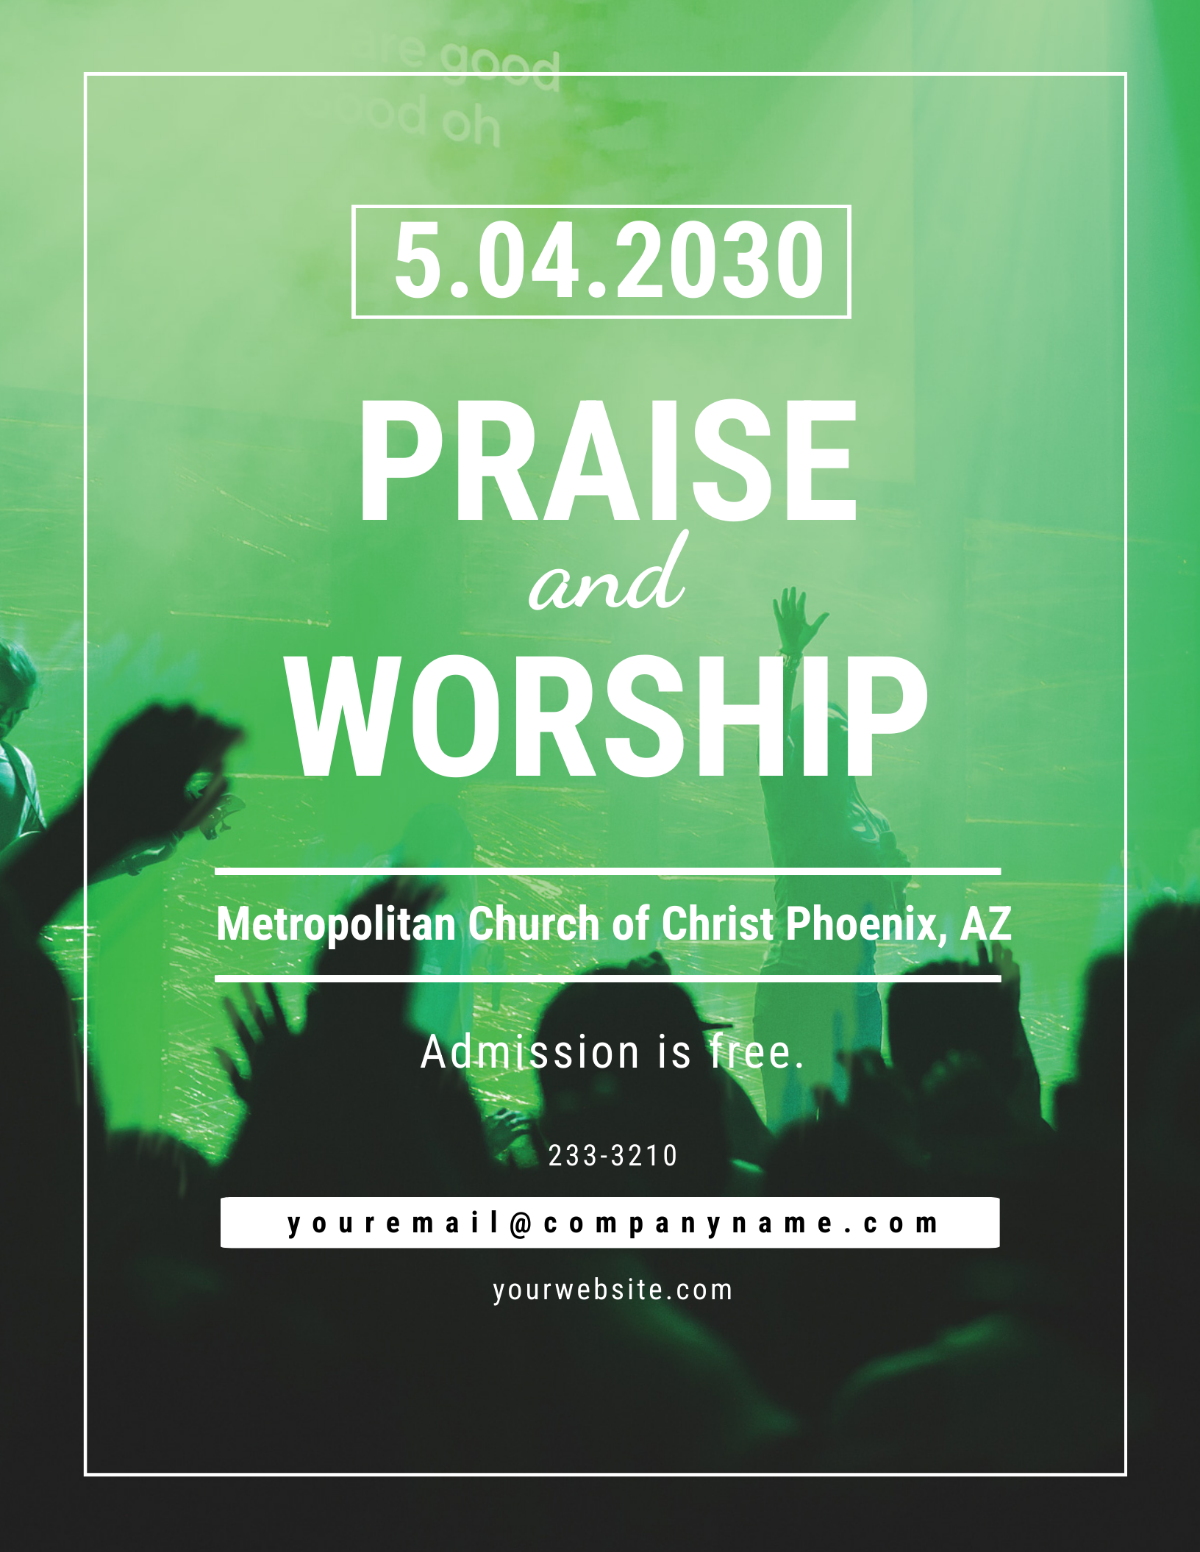 Praise And Worship Flyer